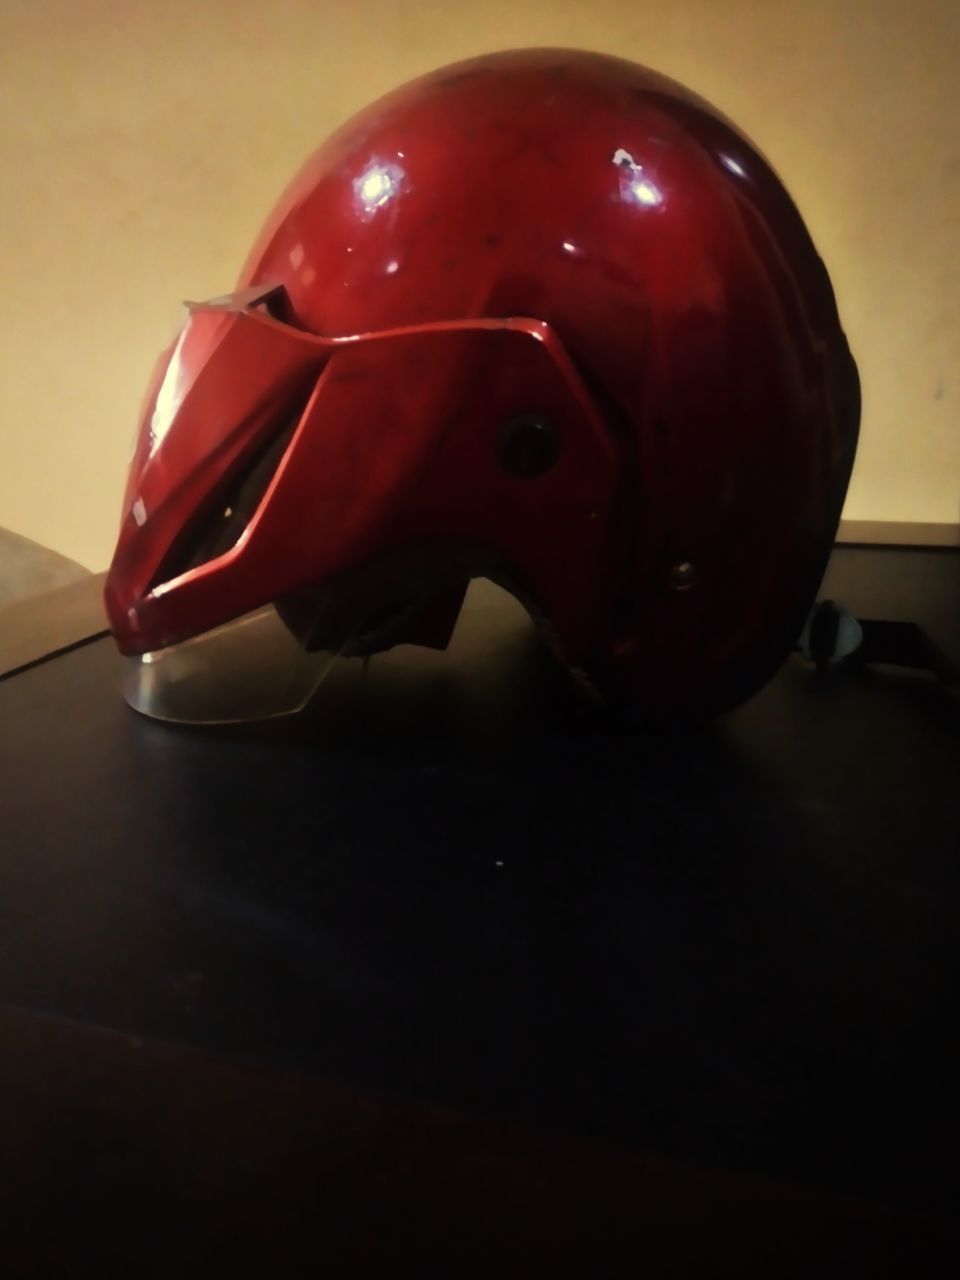 red, helmet, personal protective equipment, indoors, football equipment, headgear, clothing, sports equipment, football helmet, no people, football gear, headwear